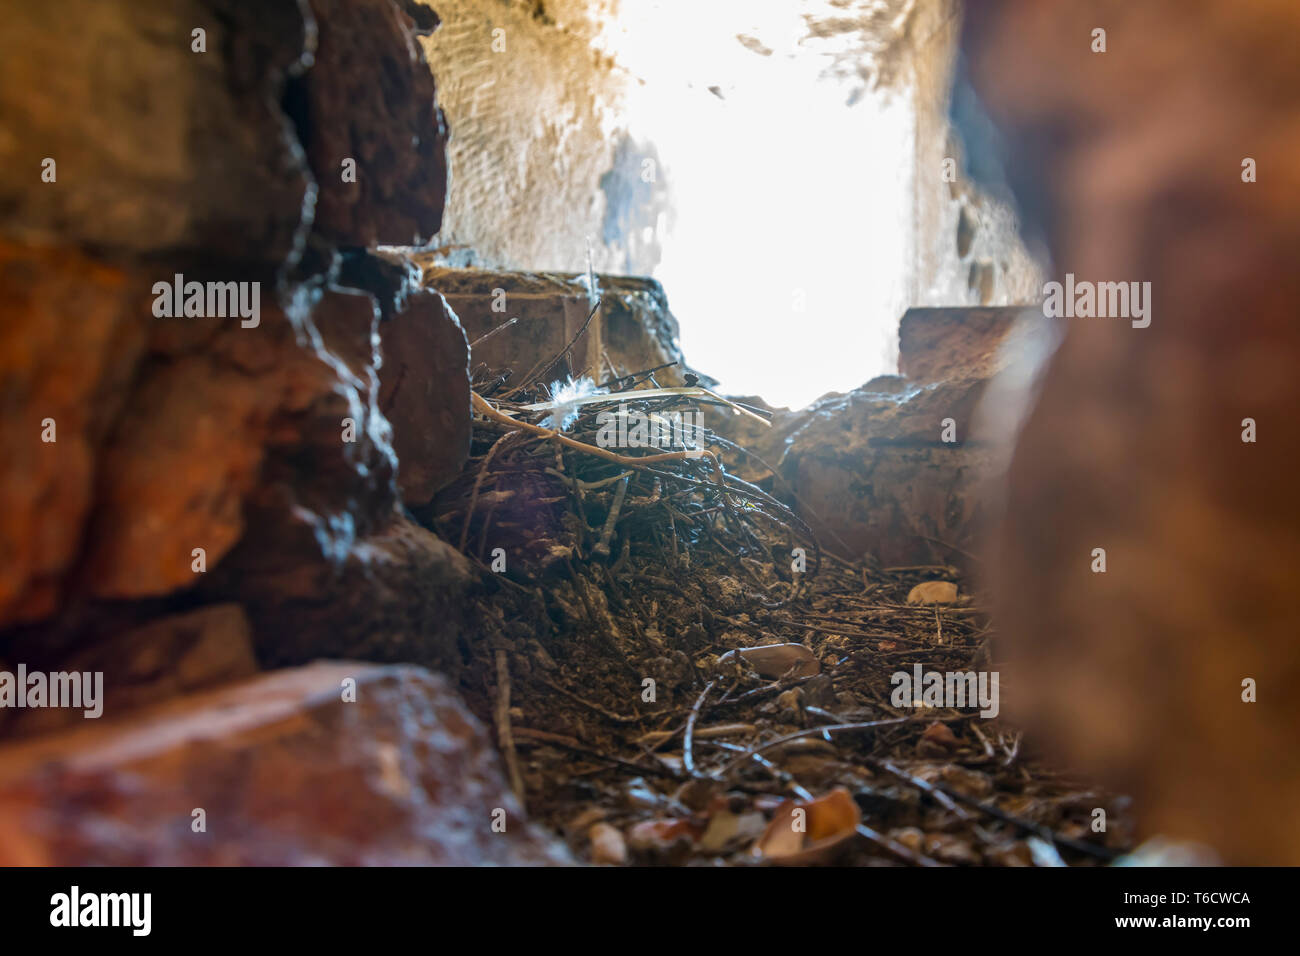 Remaining twigs of an old disused birds nest in a hole in an old degraded and damaged wall in the UK. Stock Photo